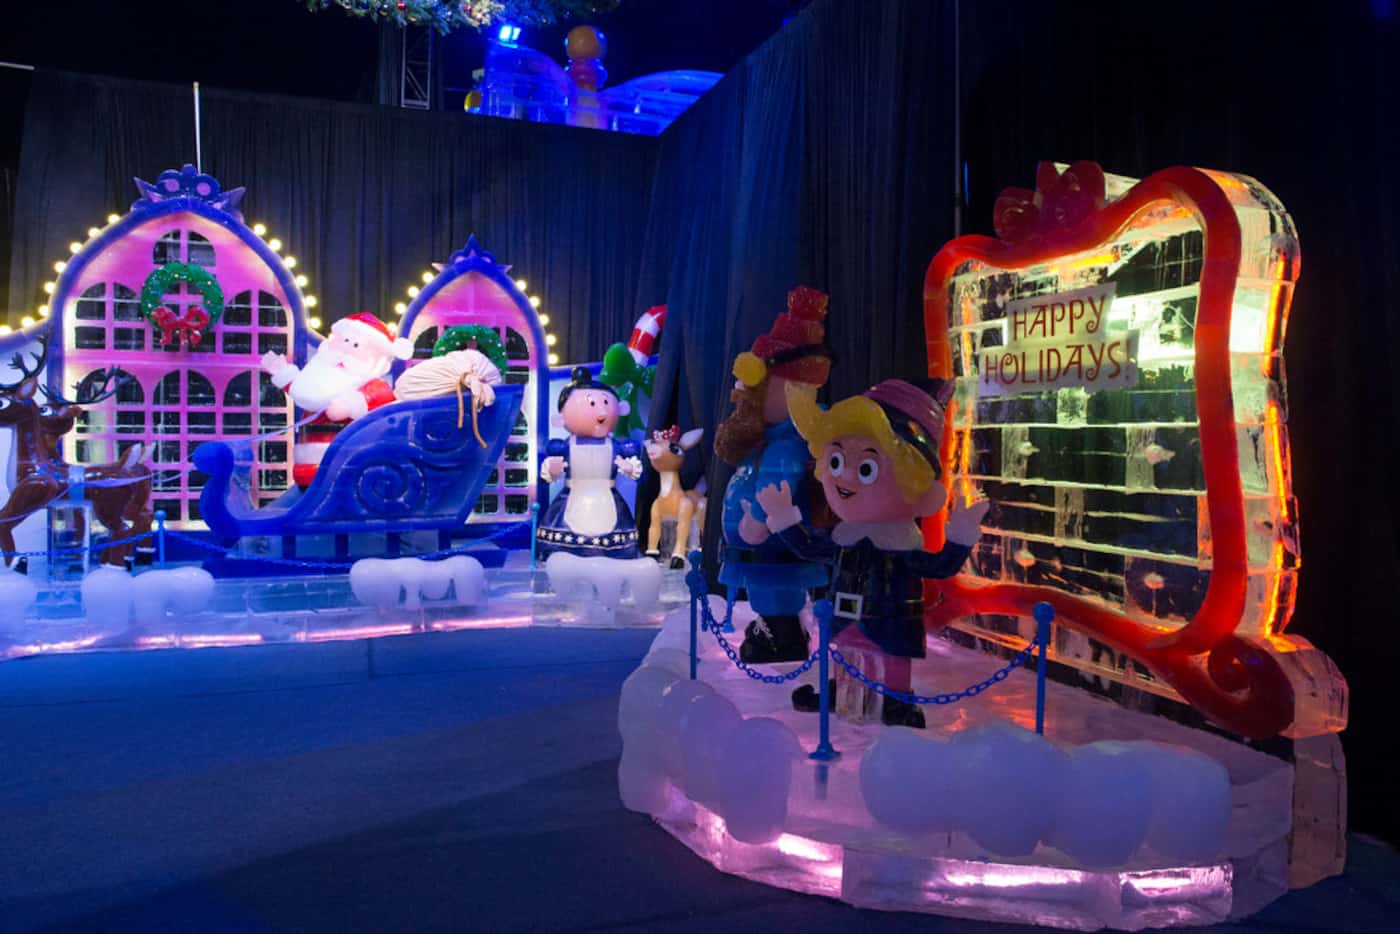 This year's ICE! exhibit at Gaylord Texan in Grapevine includes scenes from "Rudolph the...